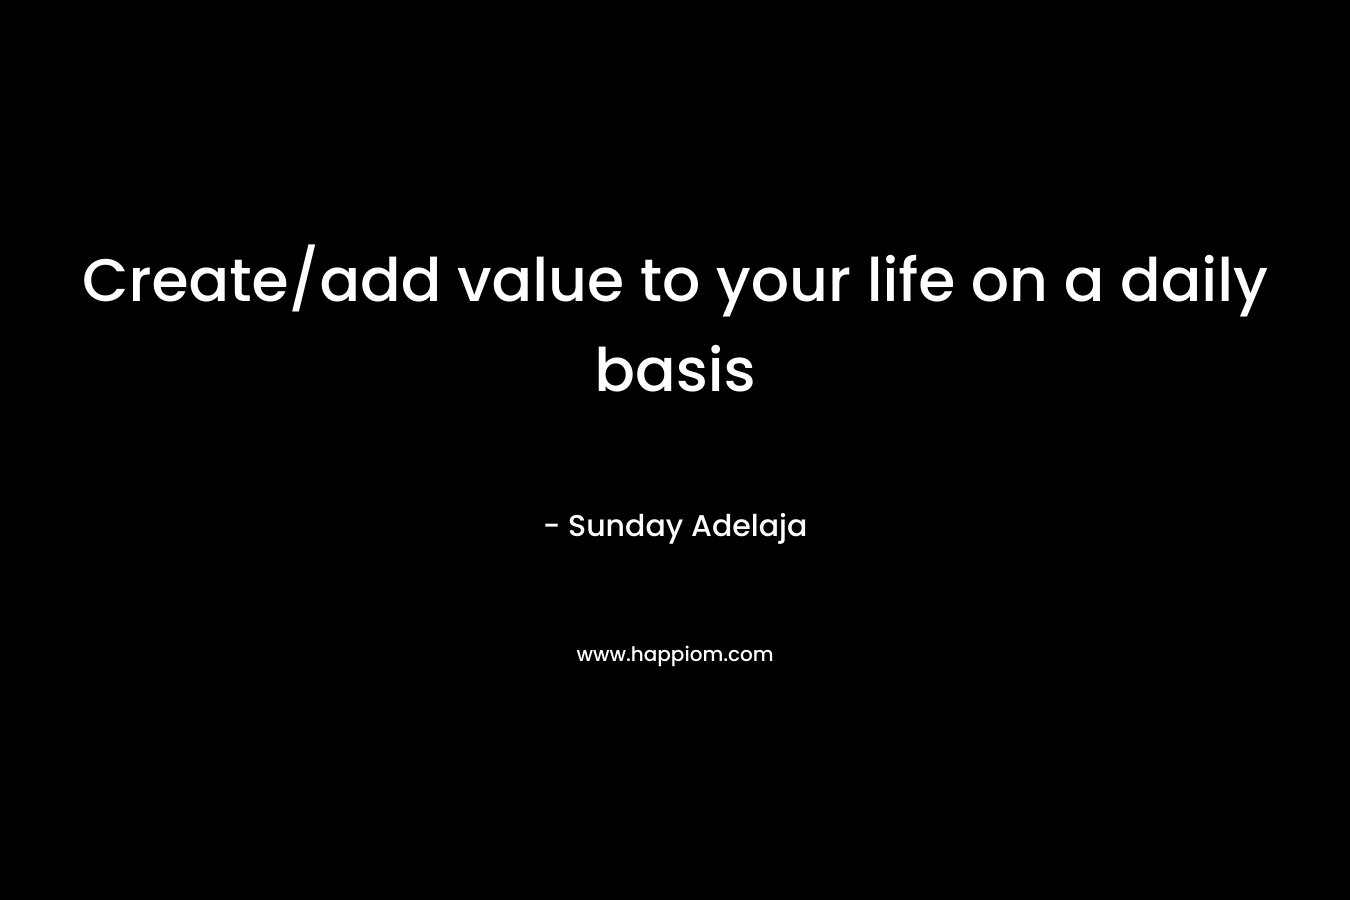 Create/add value to your life on a daily basis